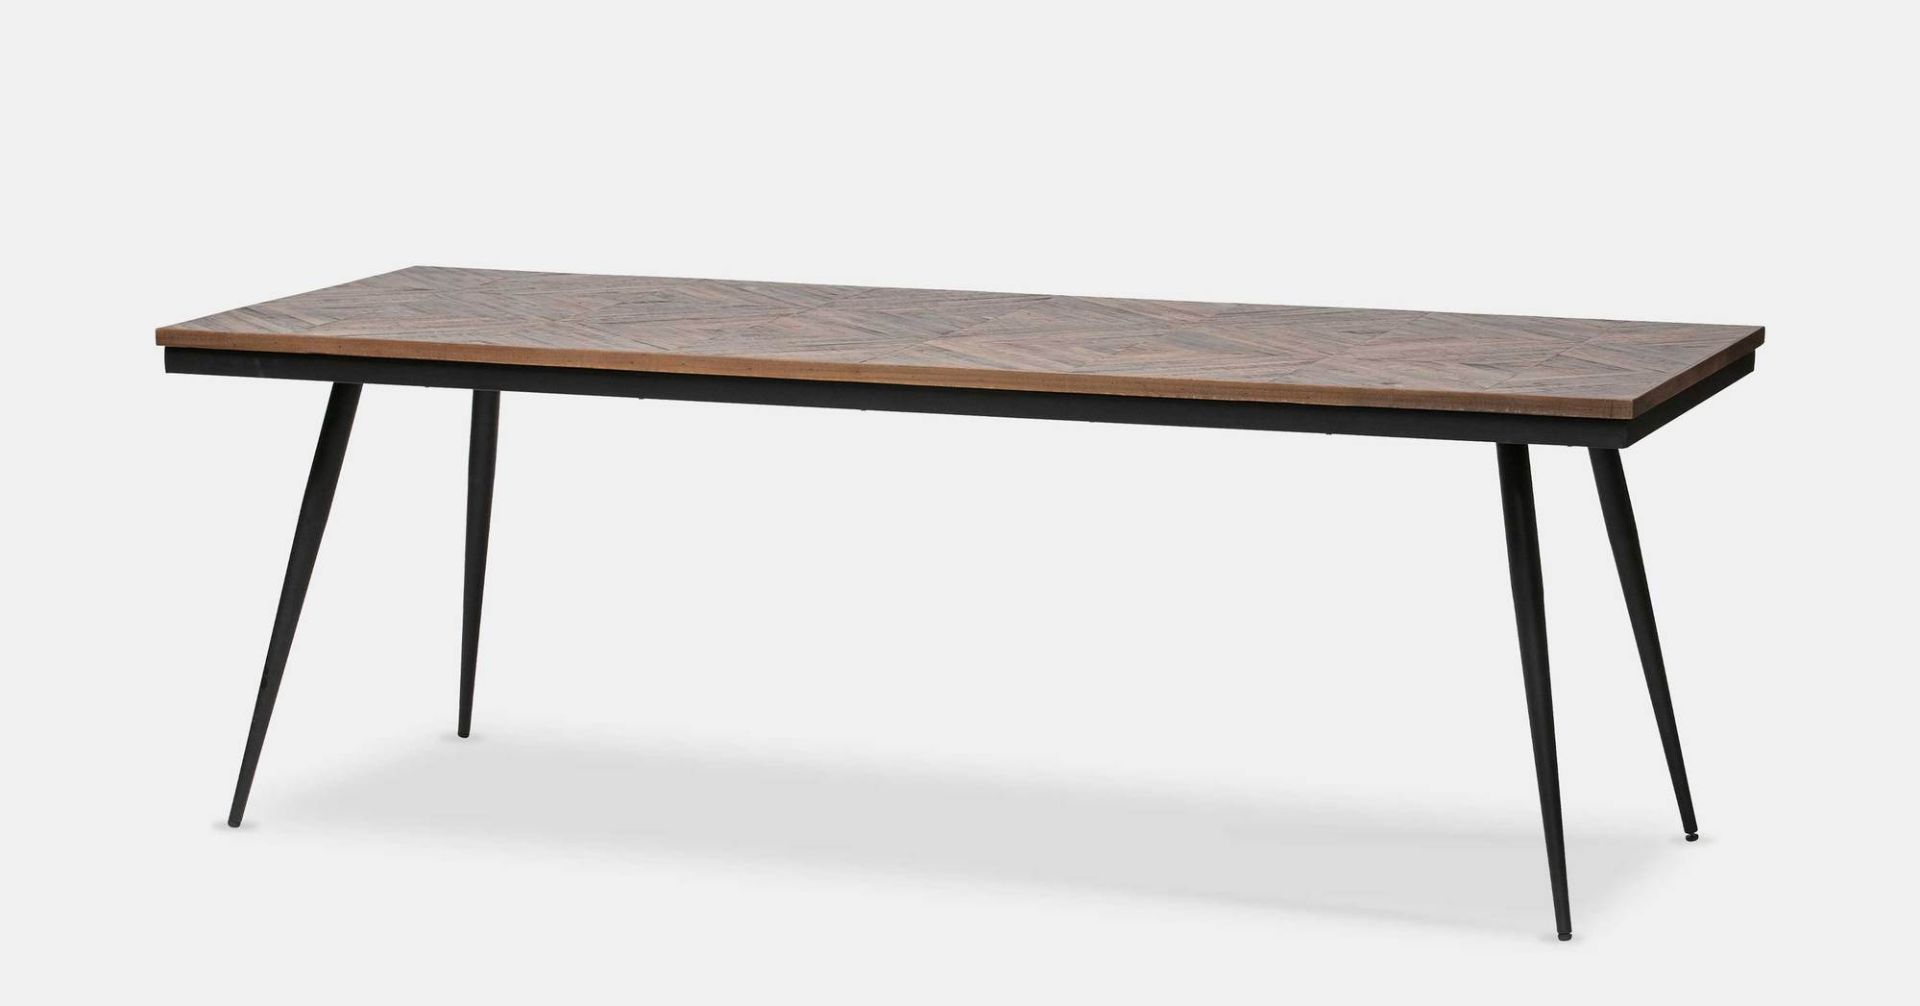 Torin 6 Person Teak Dining Table RRP £579 - Image 2 of 5